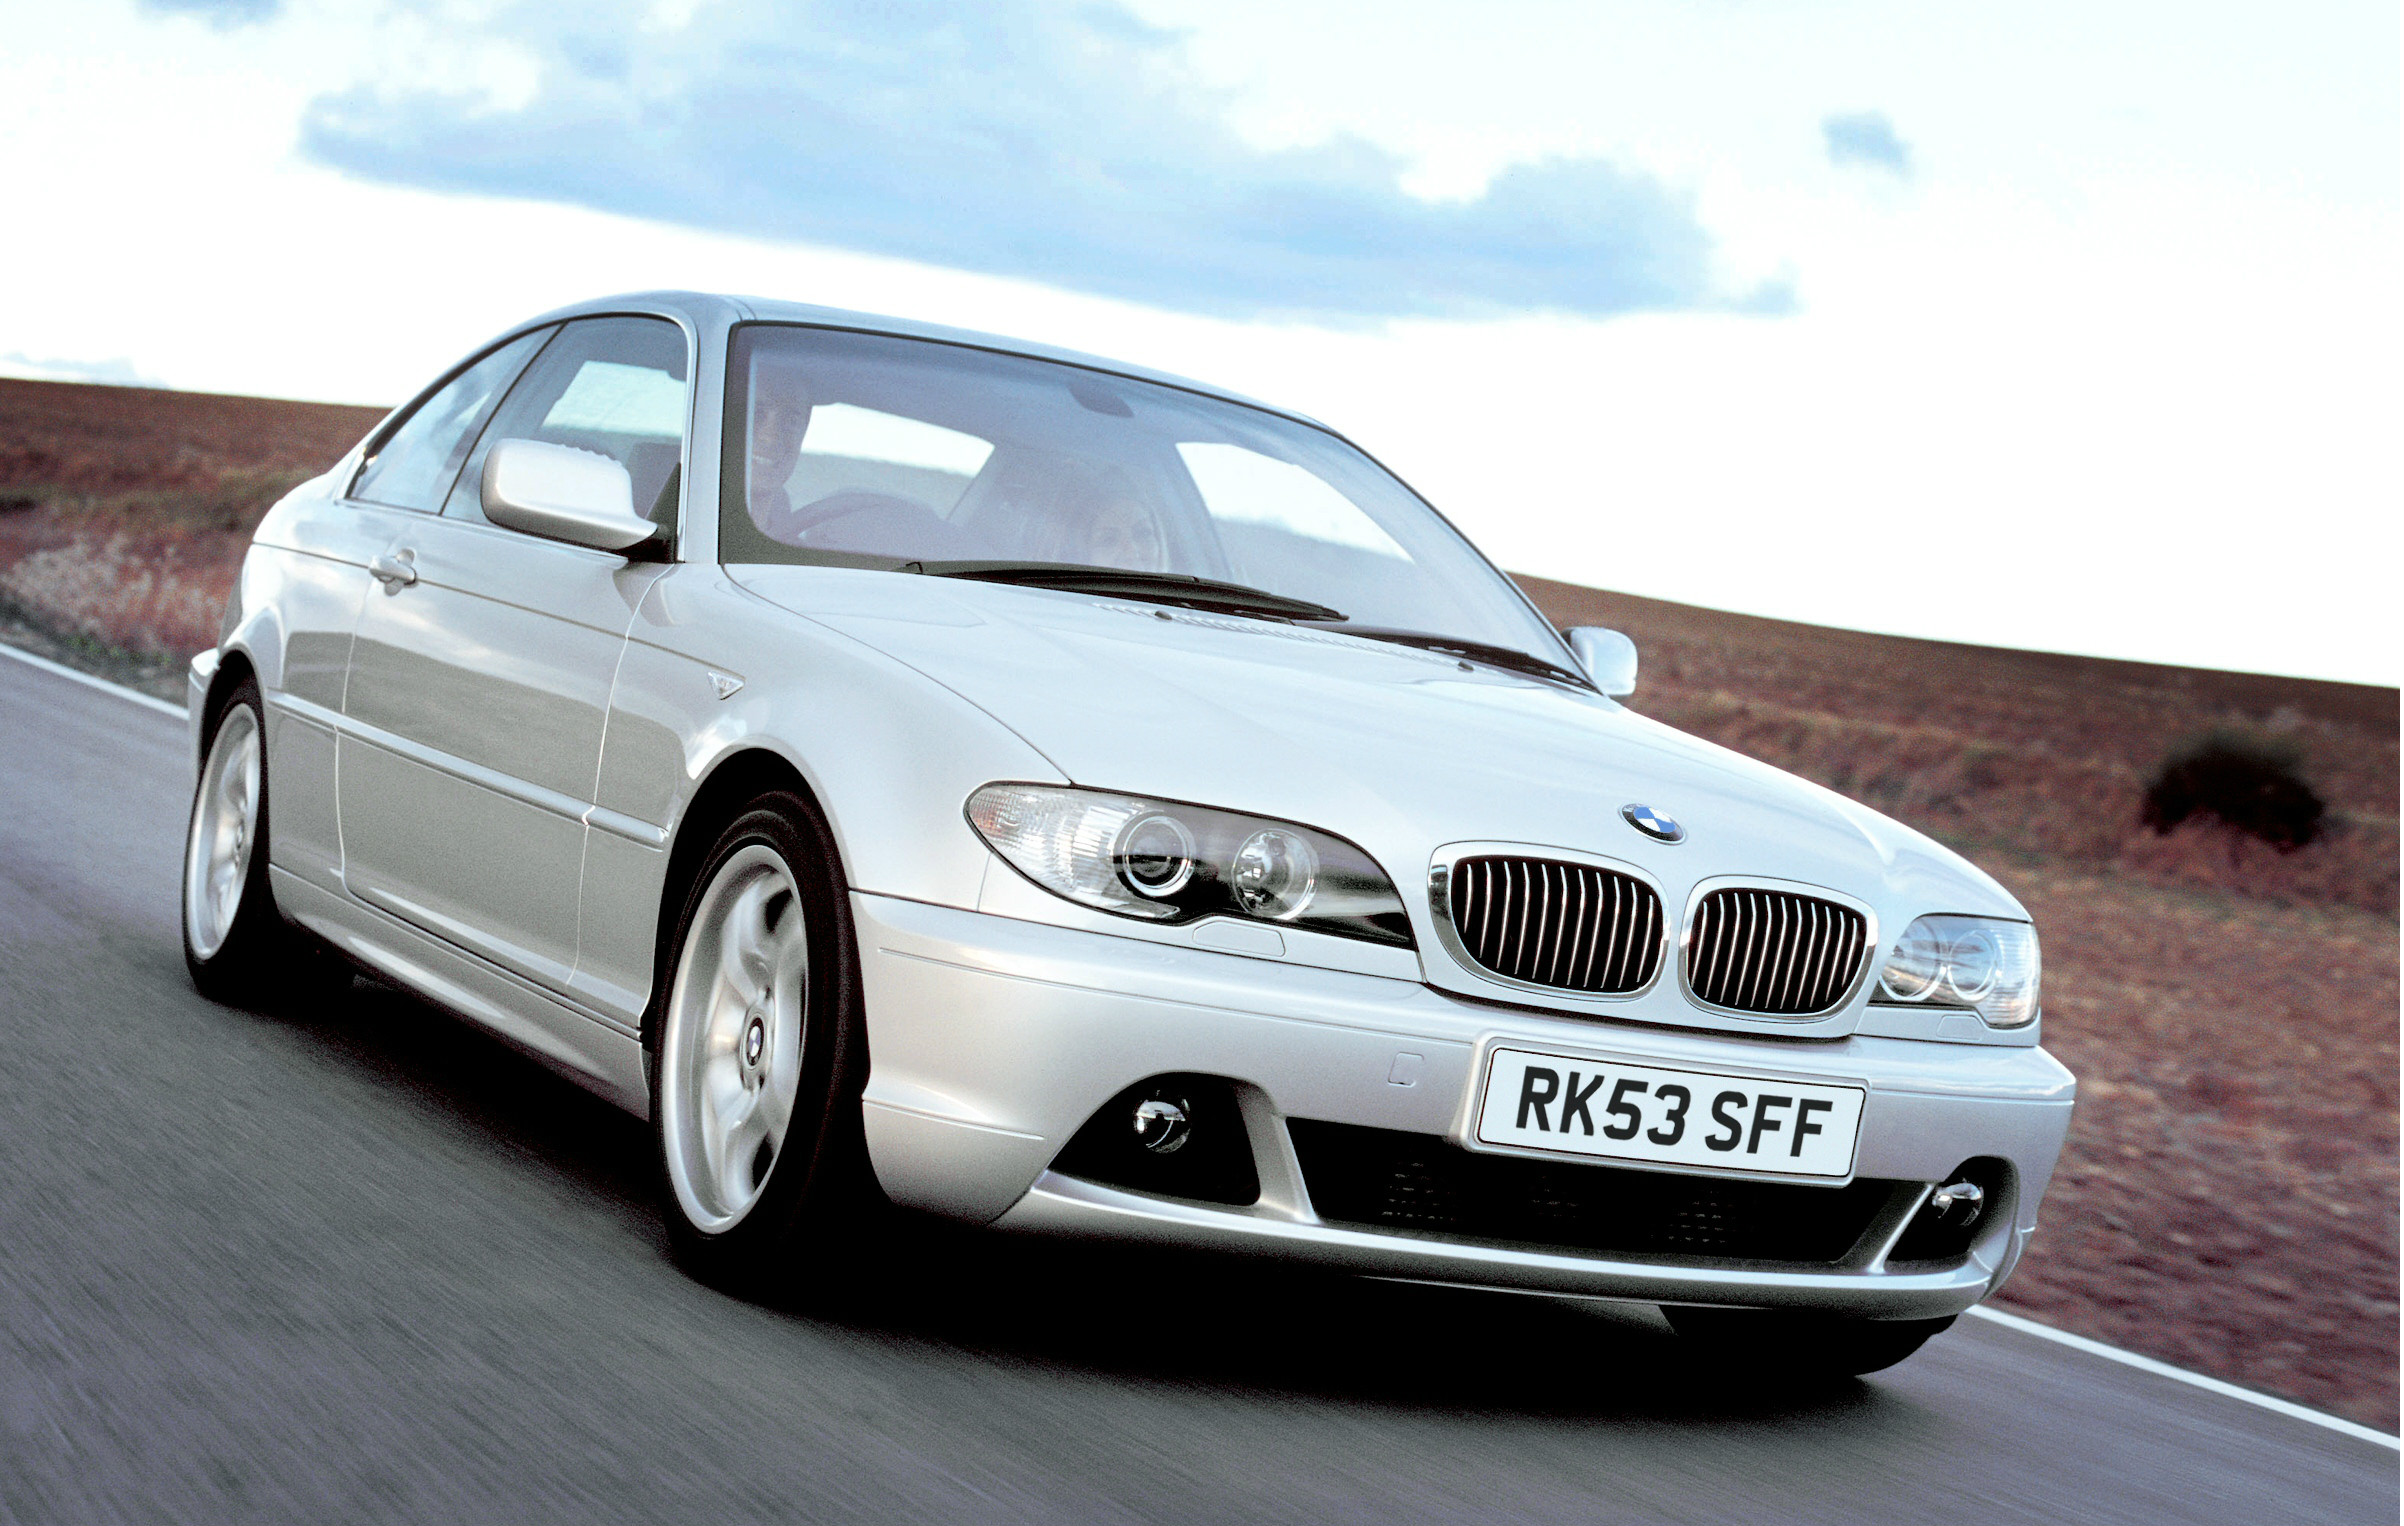 Buying guide: fantastically fun £6000 used cars, including the BMW 330 Ci